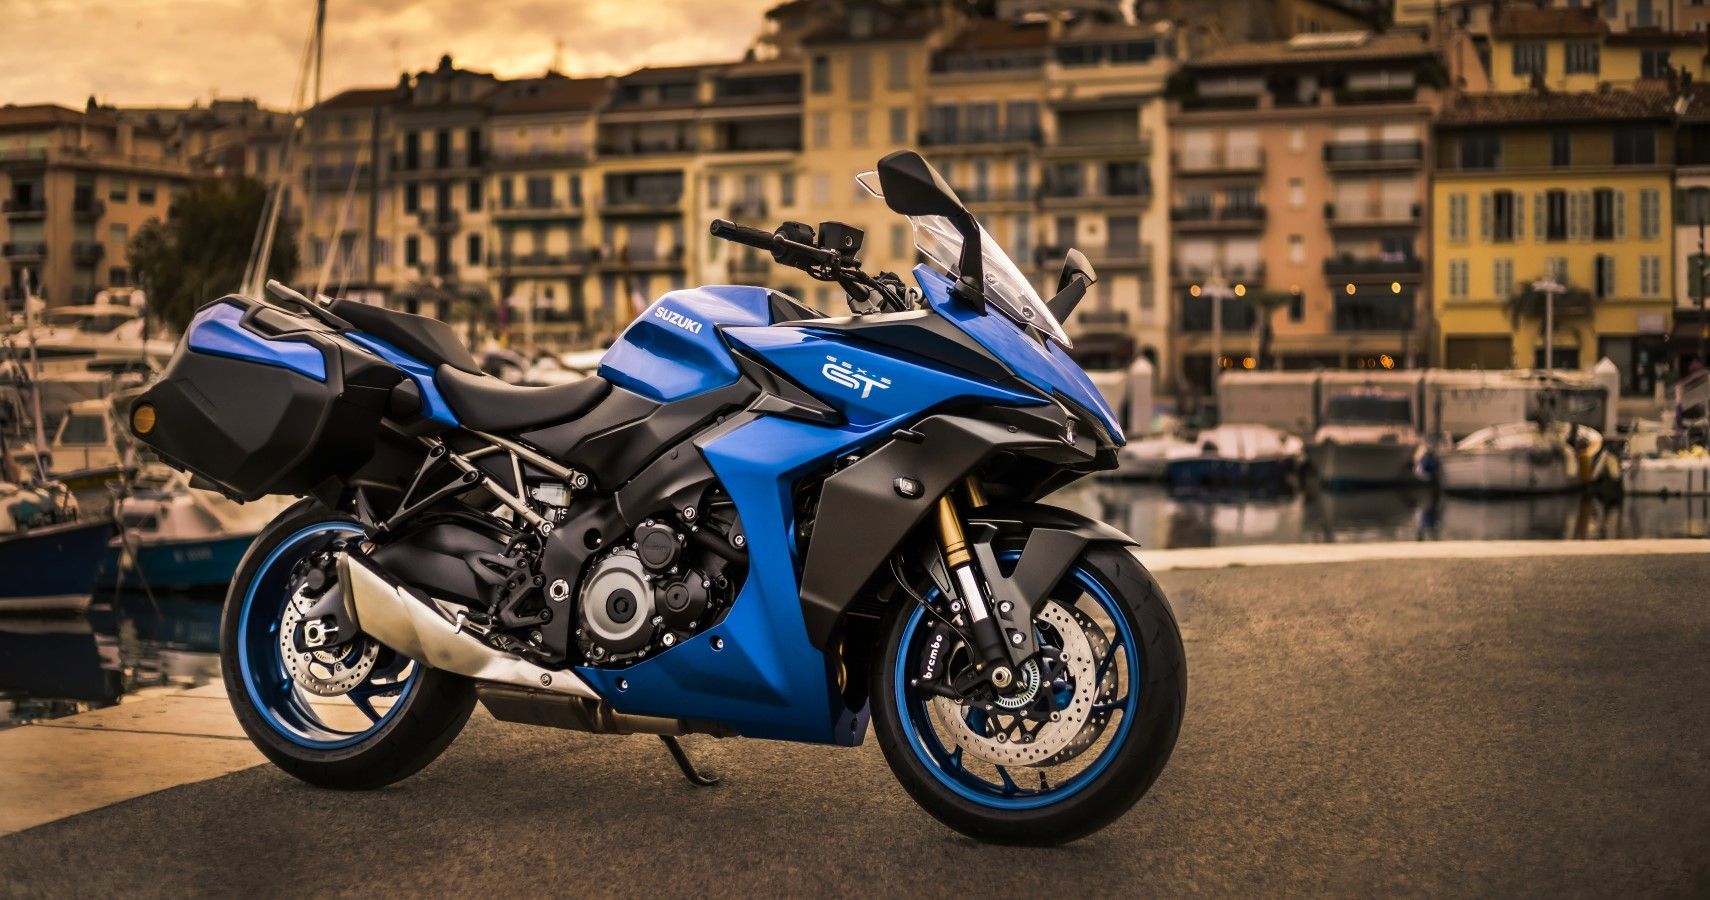 2022 Suzuki GSX-S1000GT is the newest superfast tourer and it looks cool